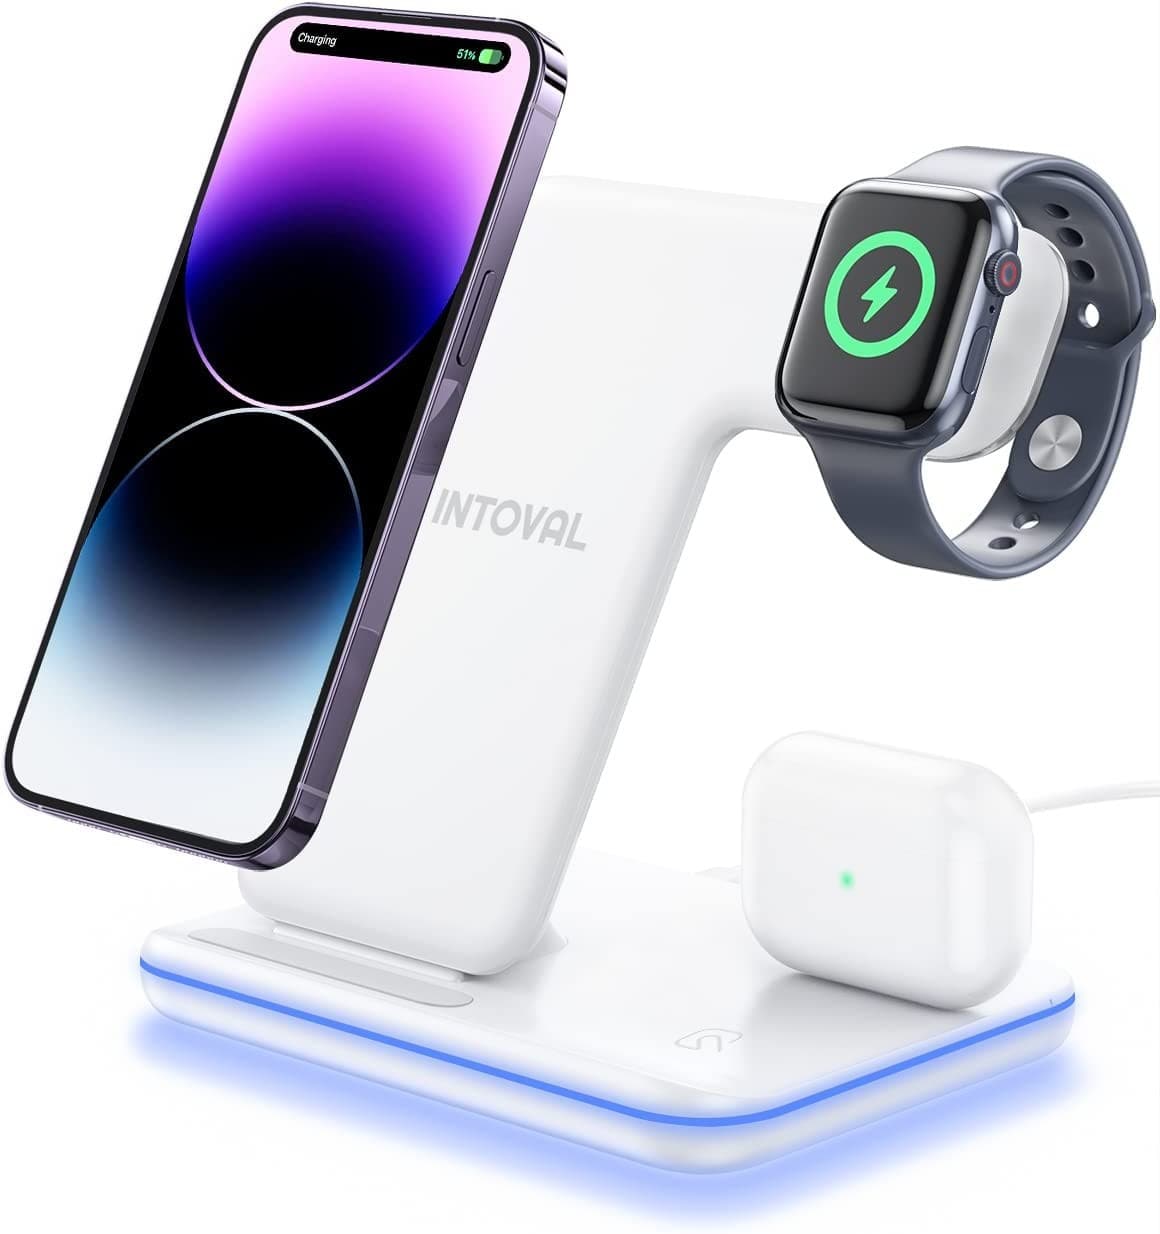 Intoval Wireless Charger, 3 in 1 Charger for iPhone/iWatch/Airpod